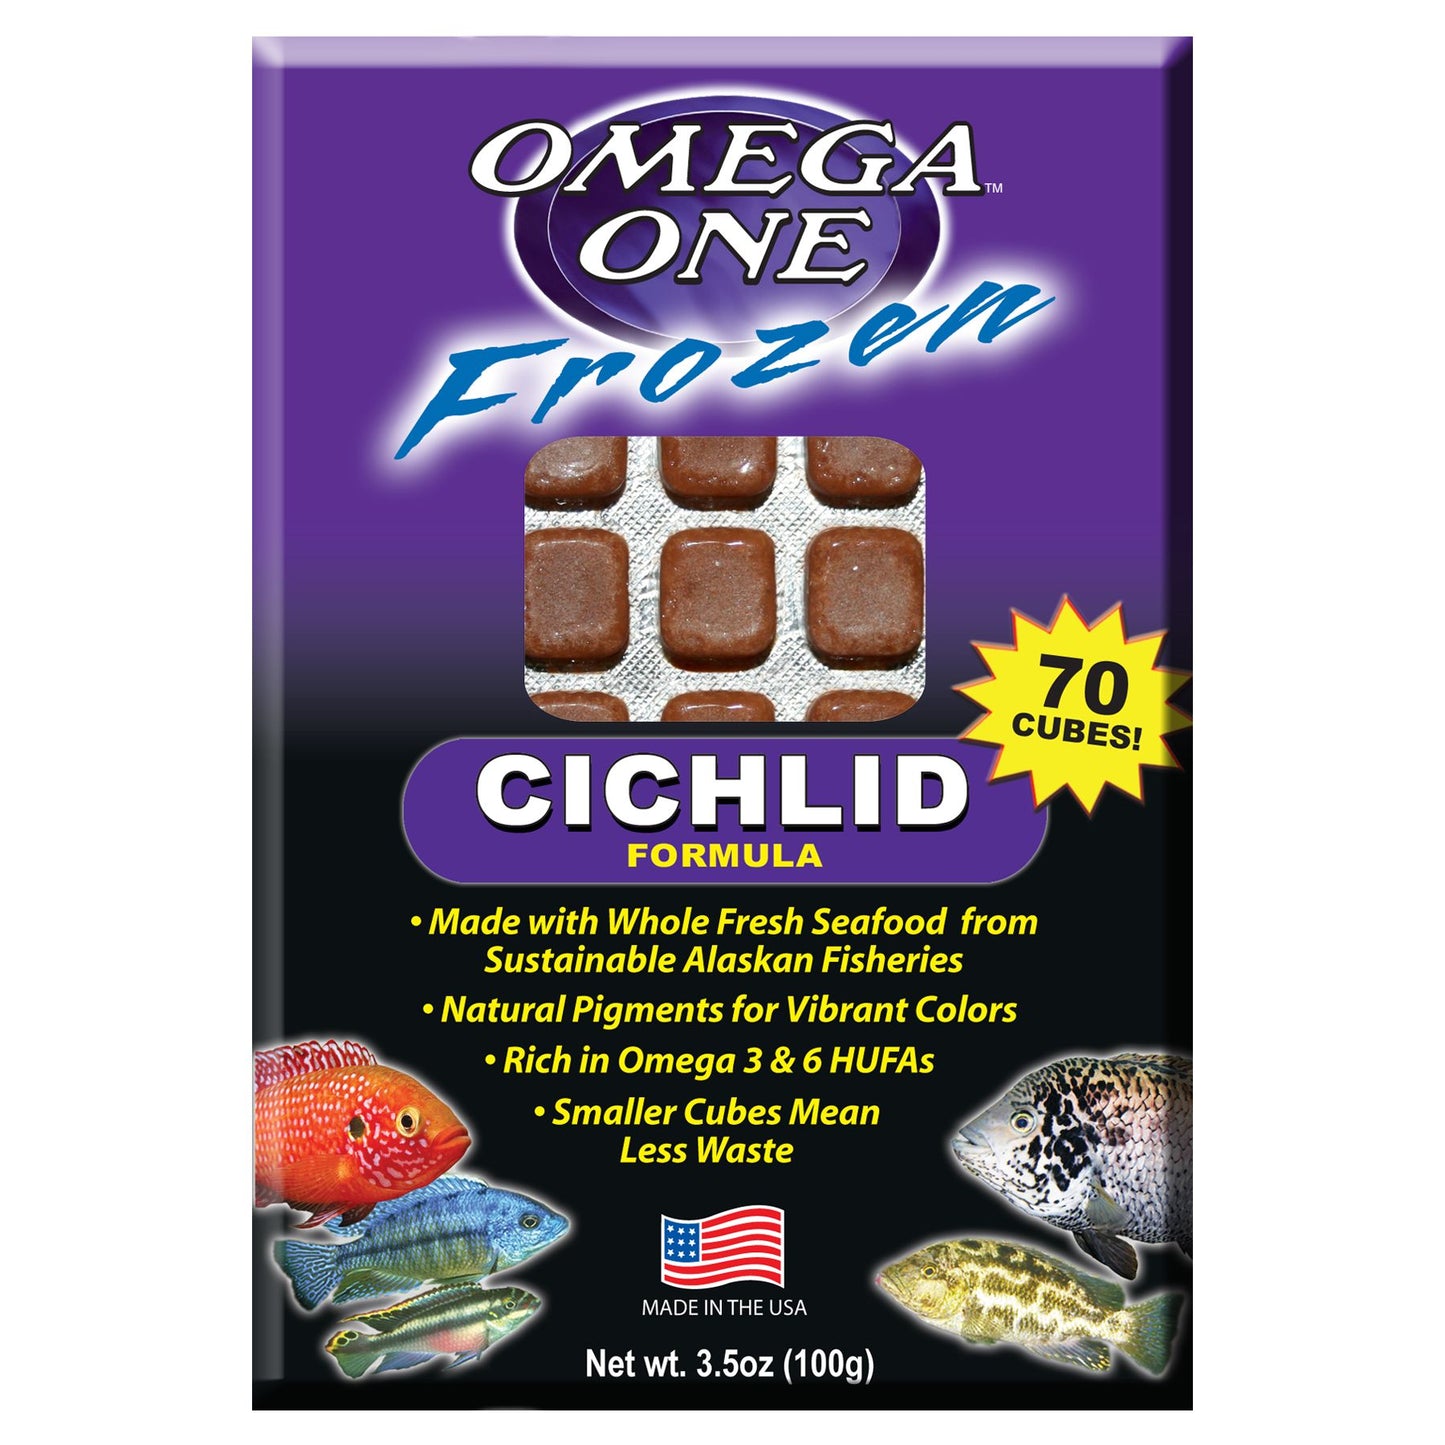 Frozen Cichild Formula Omega One: Only for instore Purchase